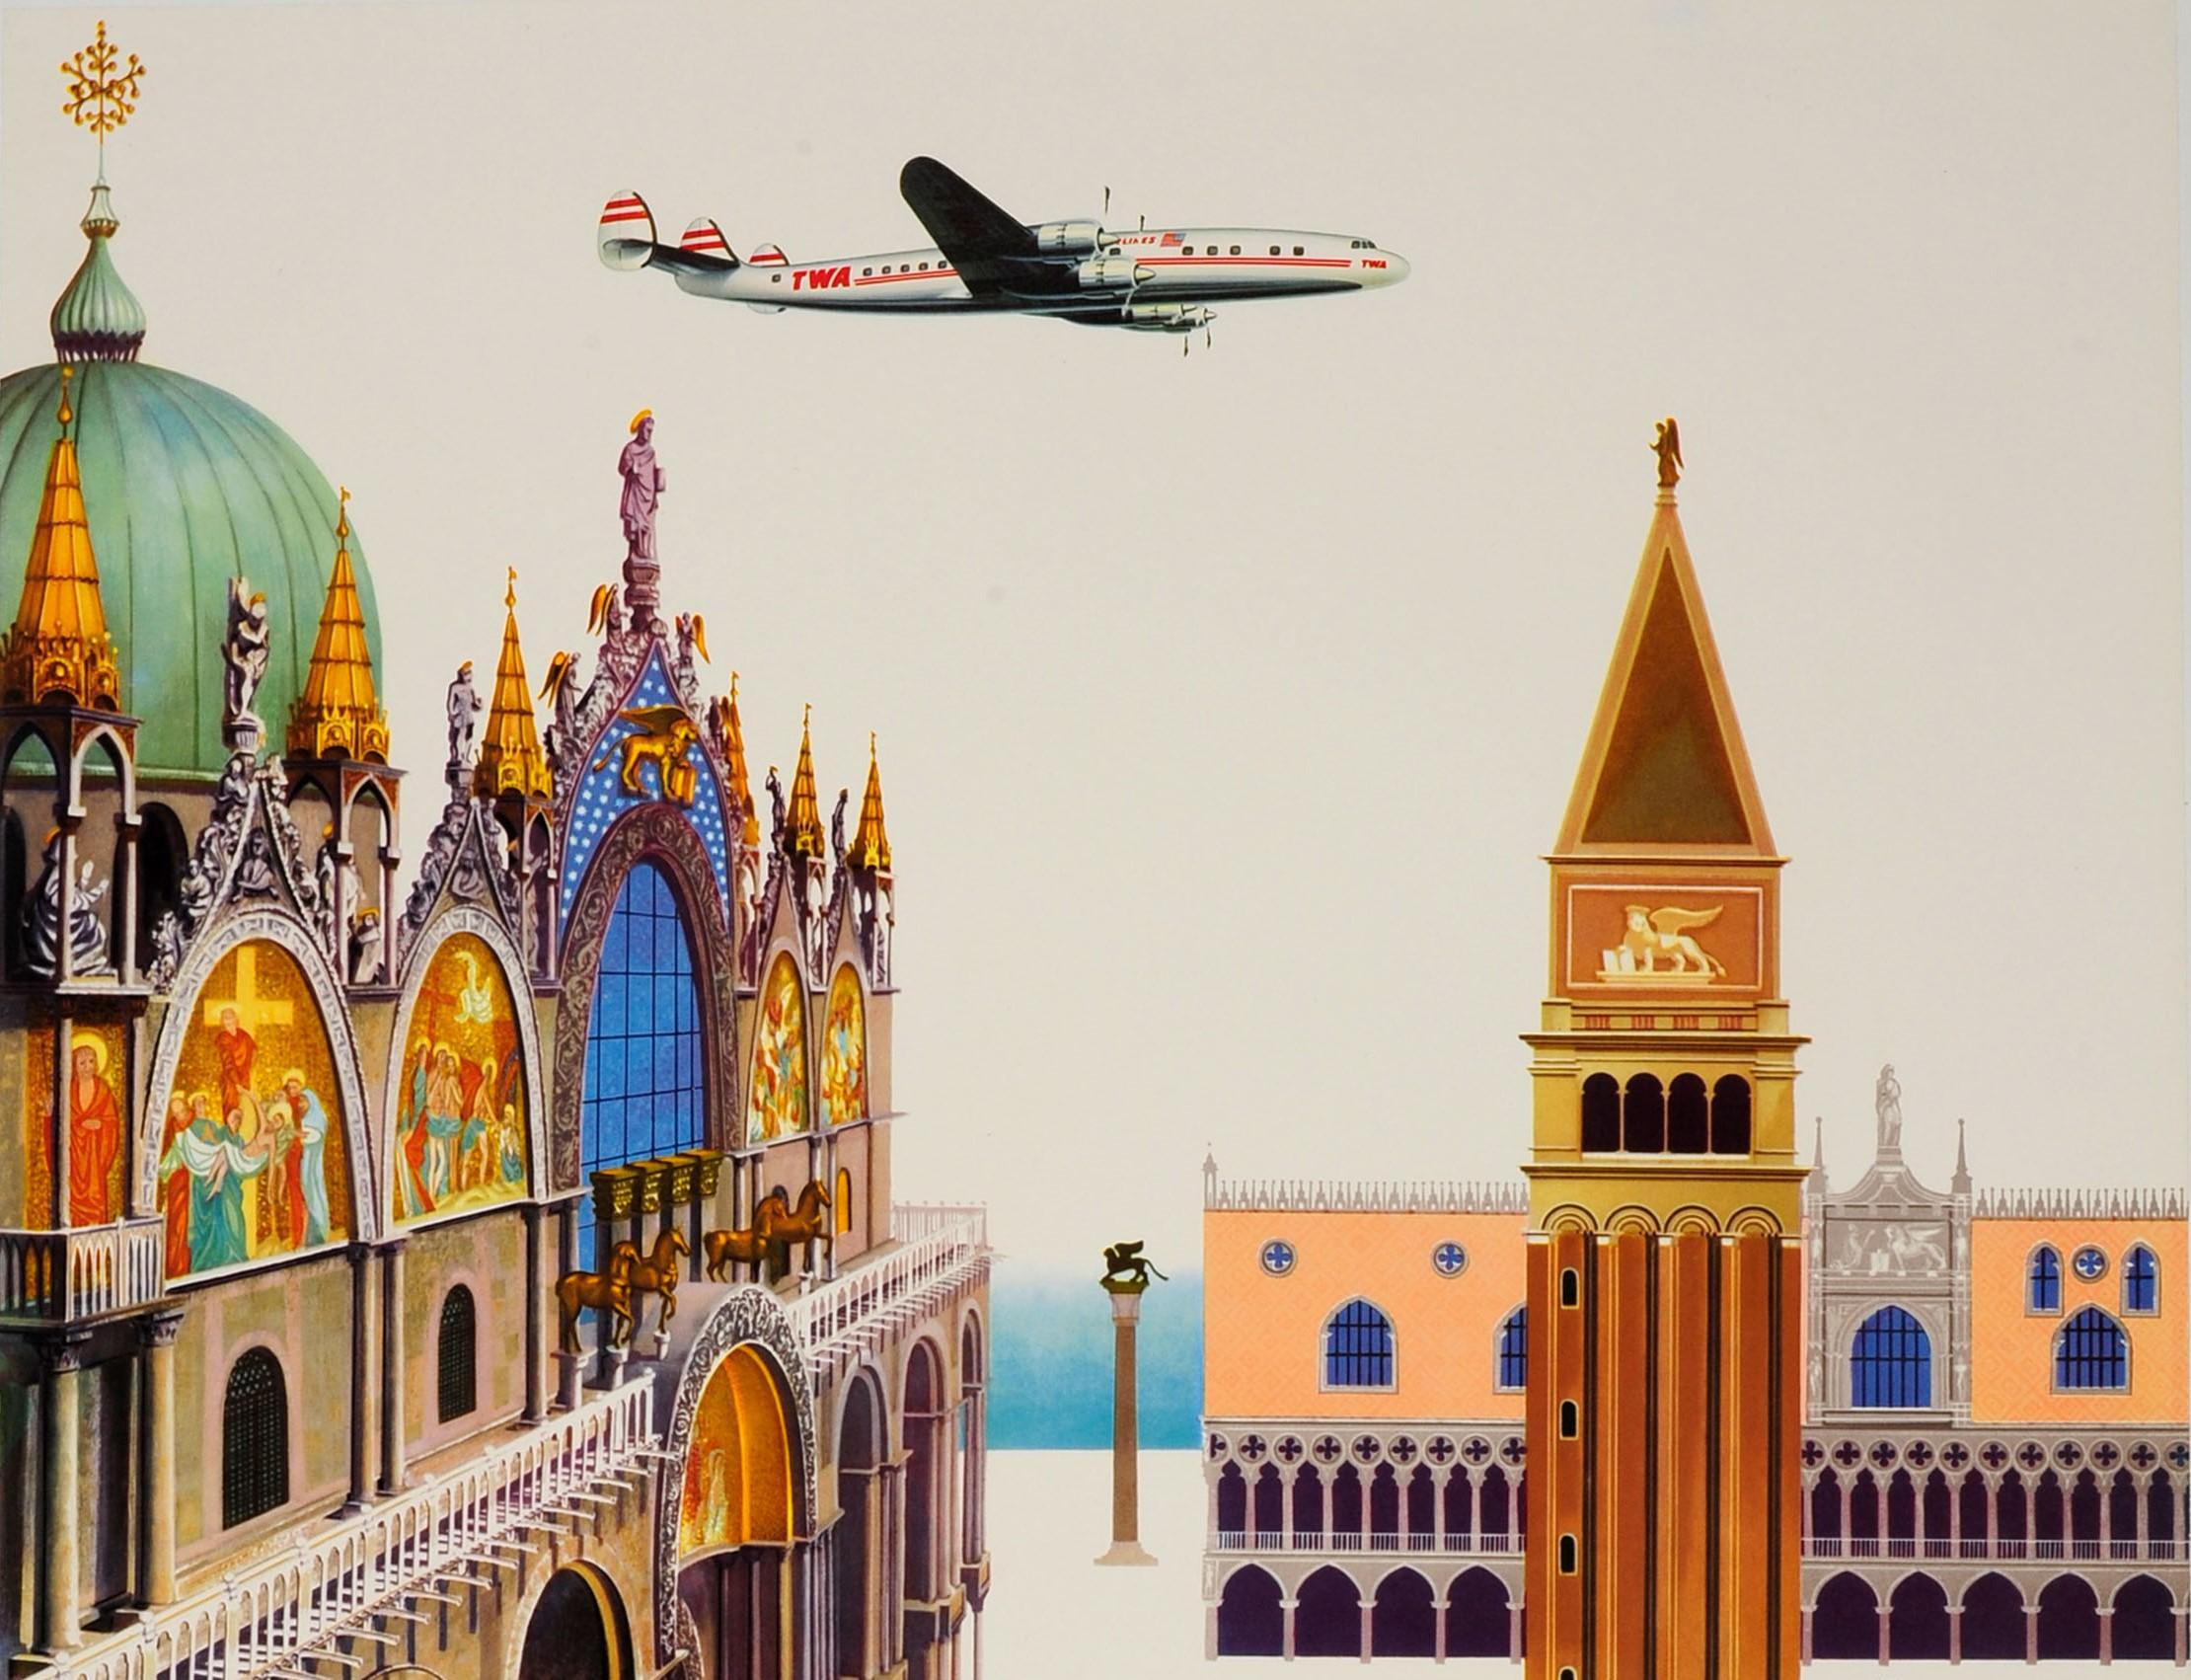 Original Vintage Airline Travel Poster Fly TWA Italy Ft San Marco Venice View - Print by David Klein